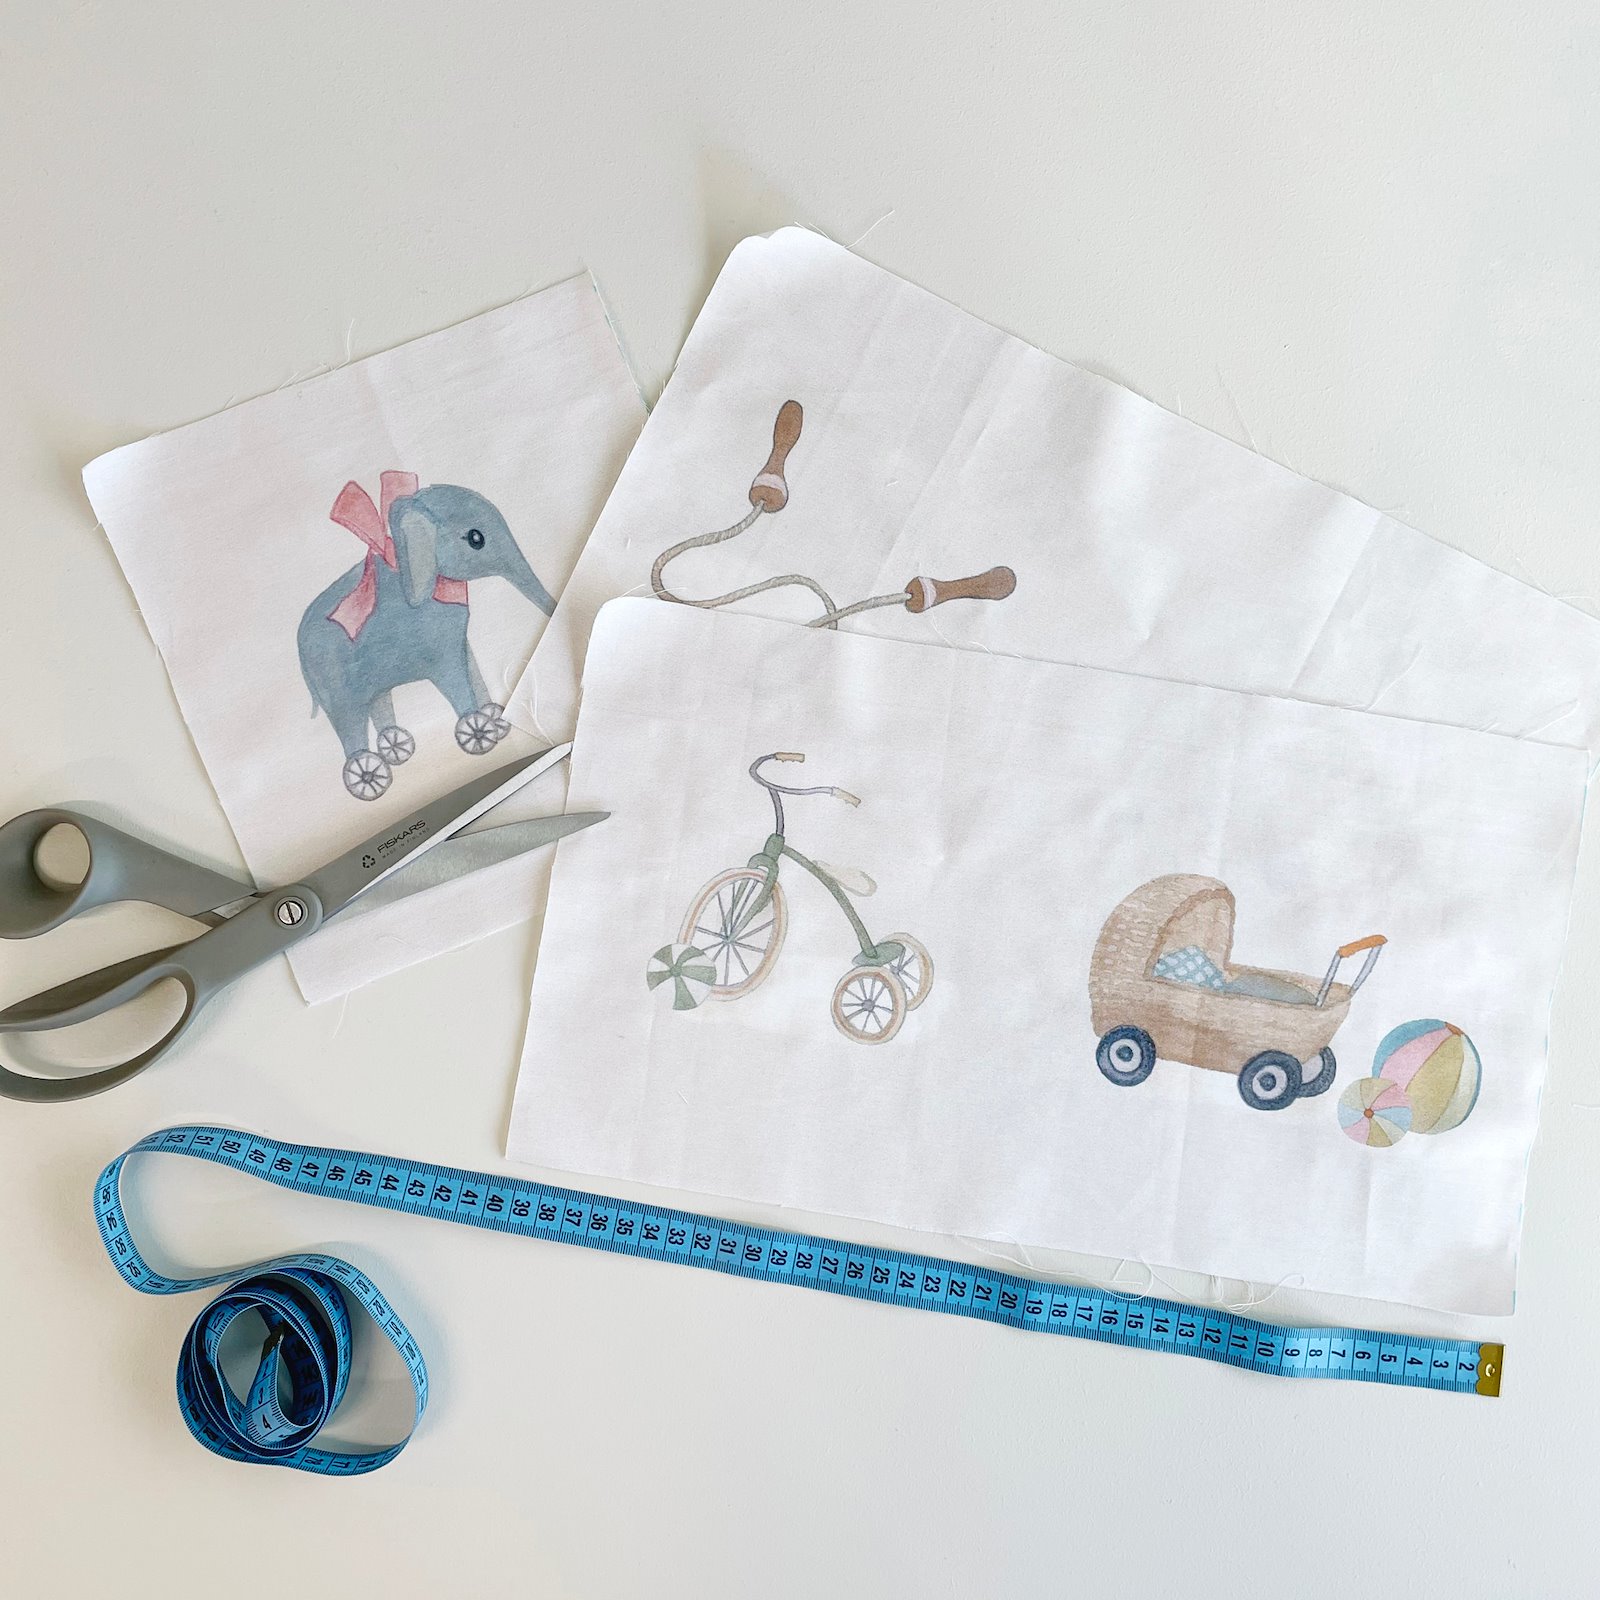 Sew it yourself: Activity book for baby DIY8057-step2.jpg